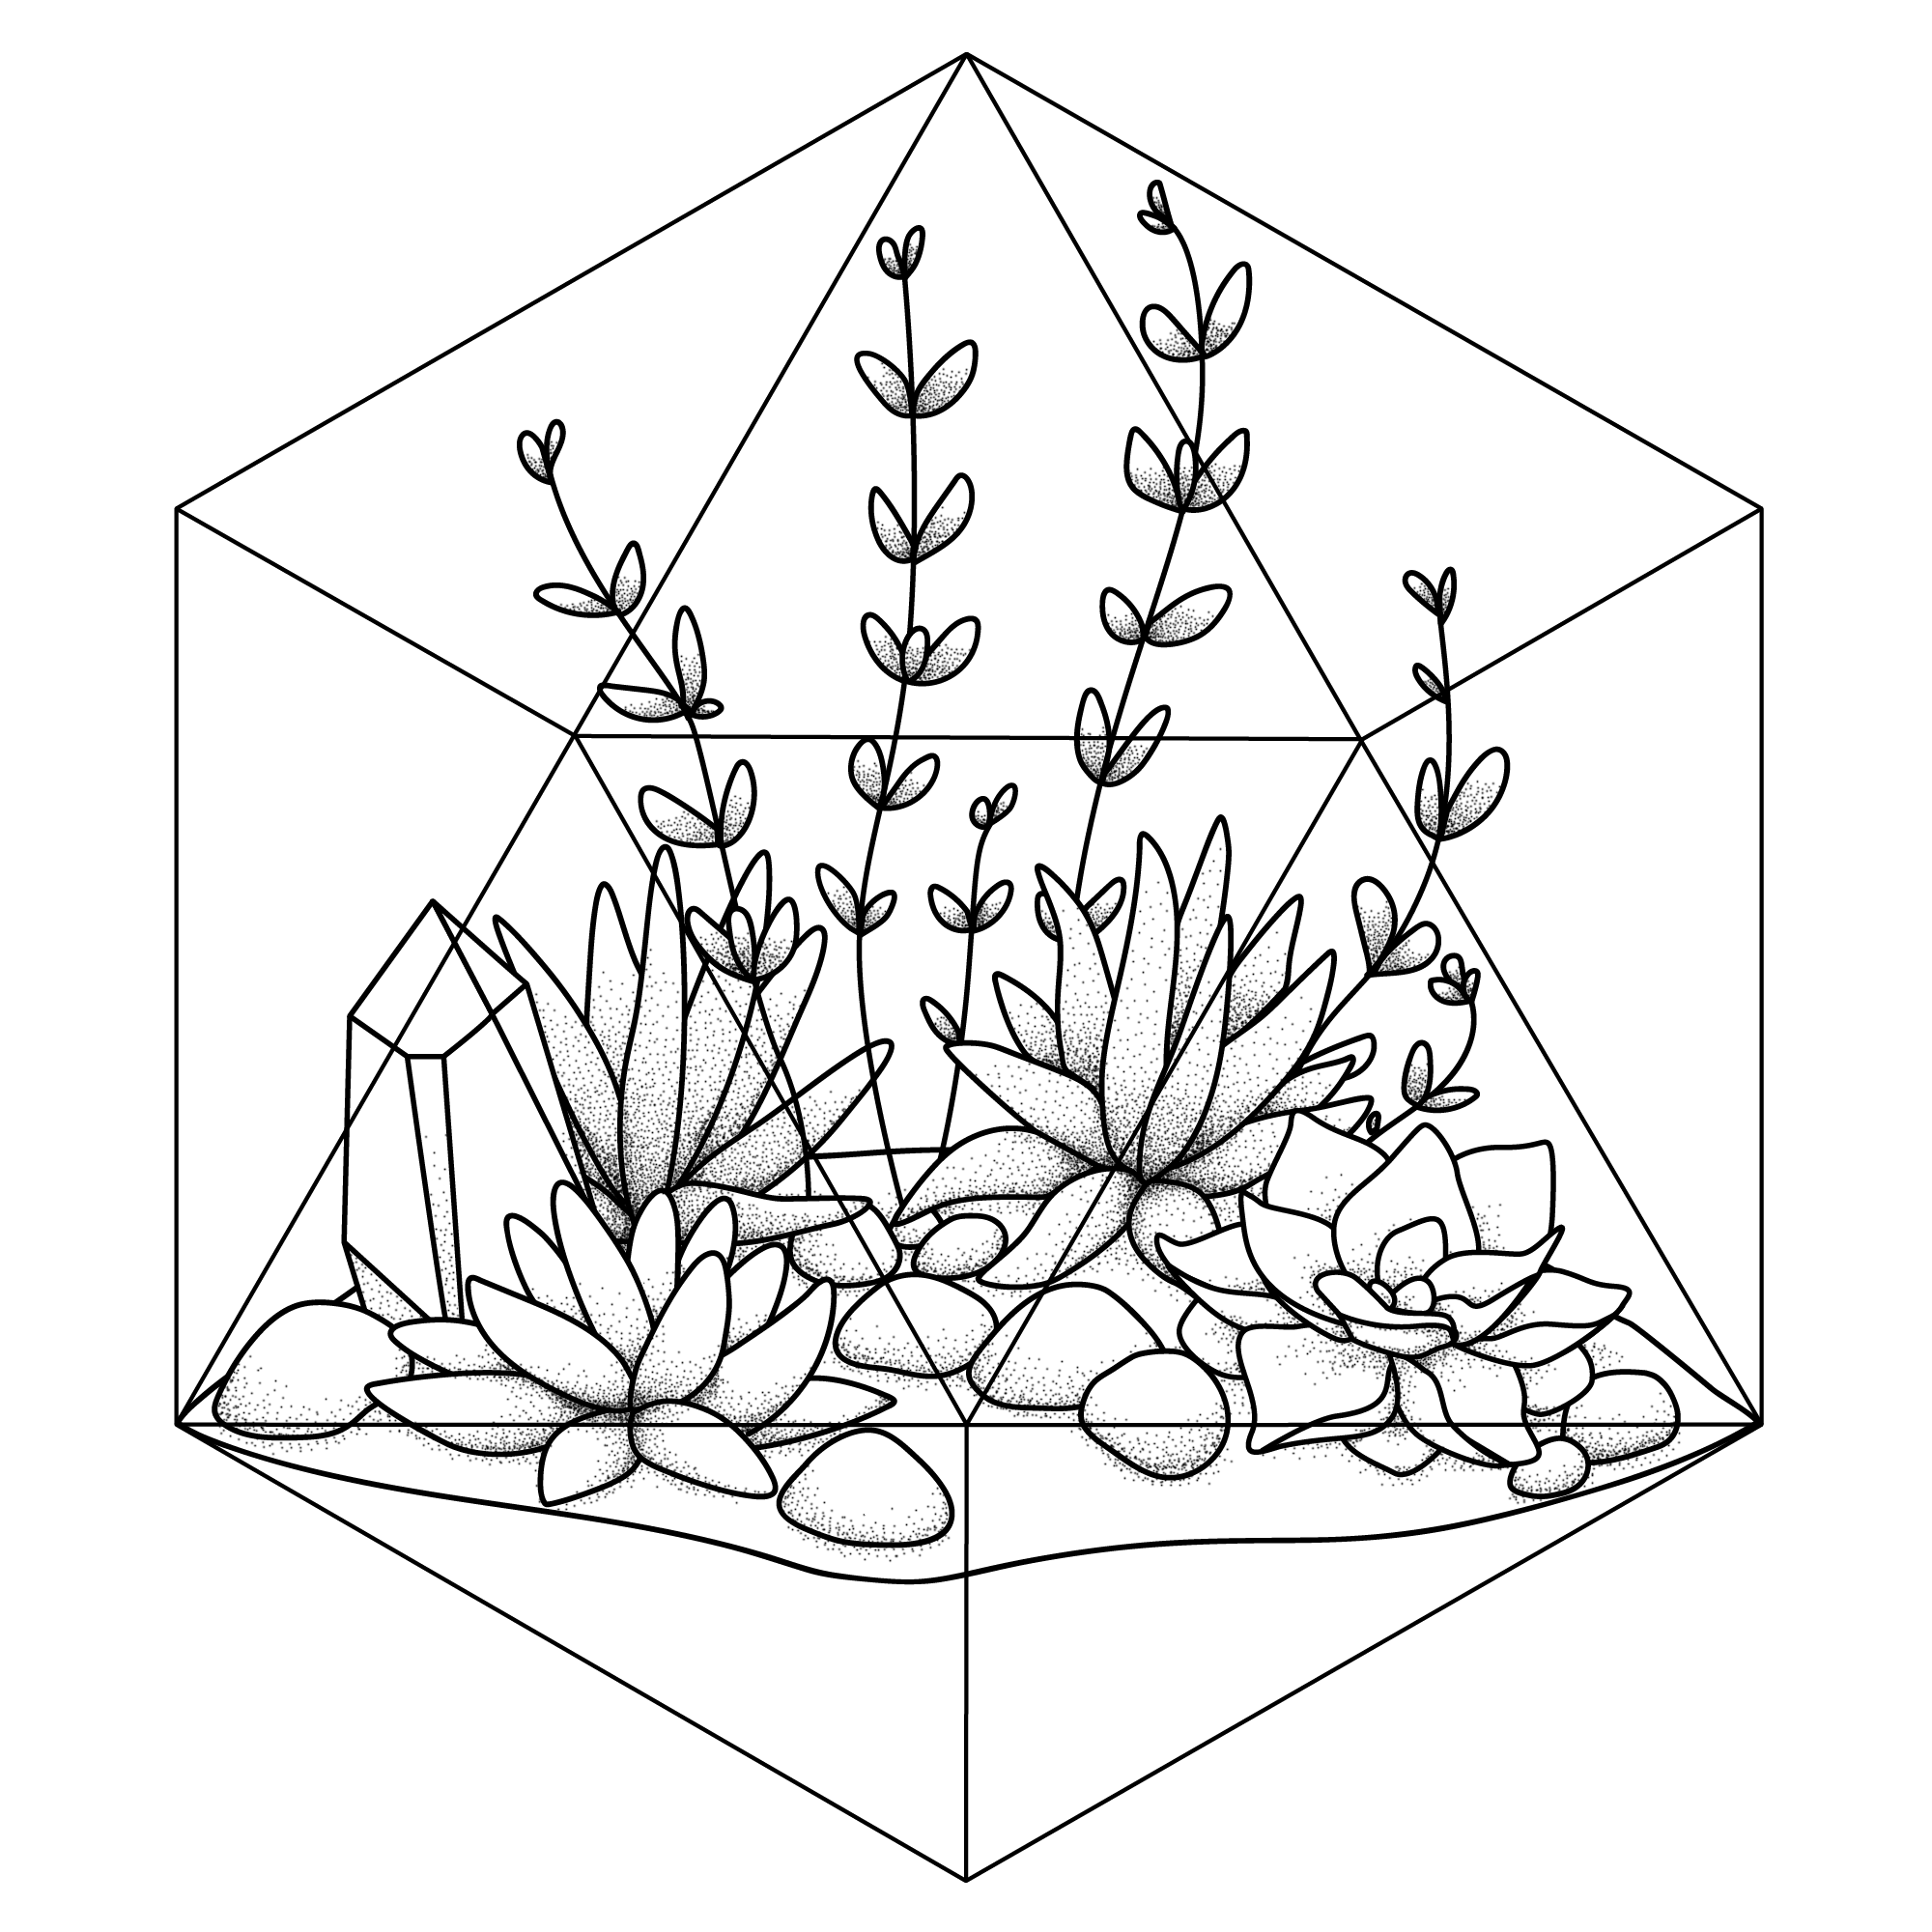 A tattoo design featuring succulents in a transparent 20-sided die.